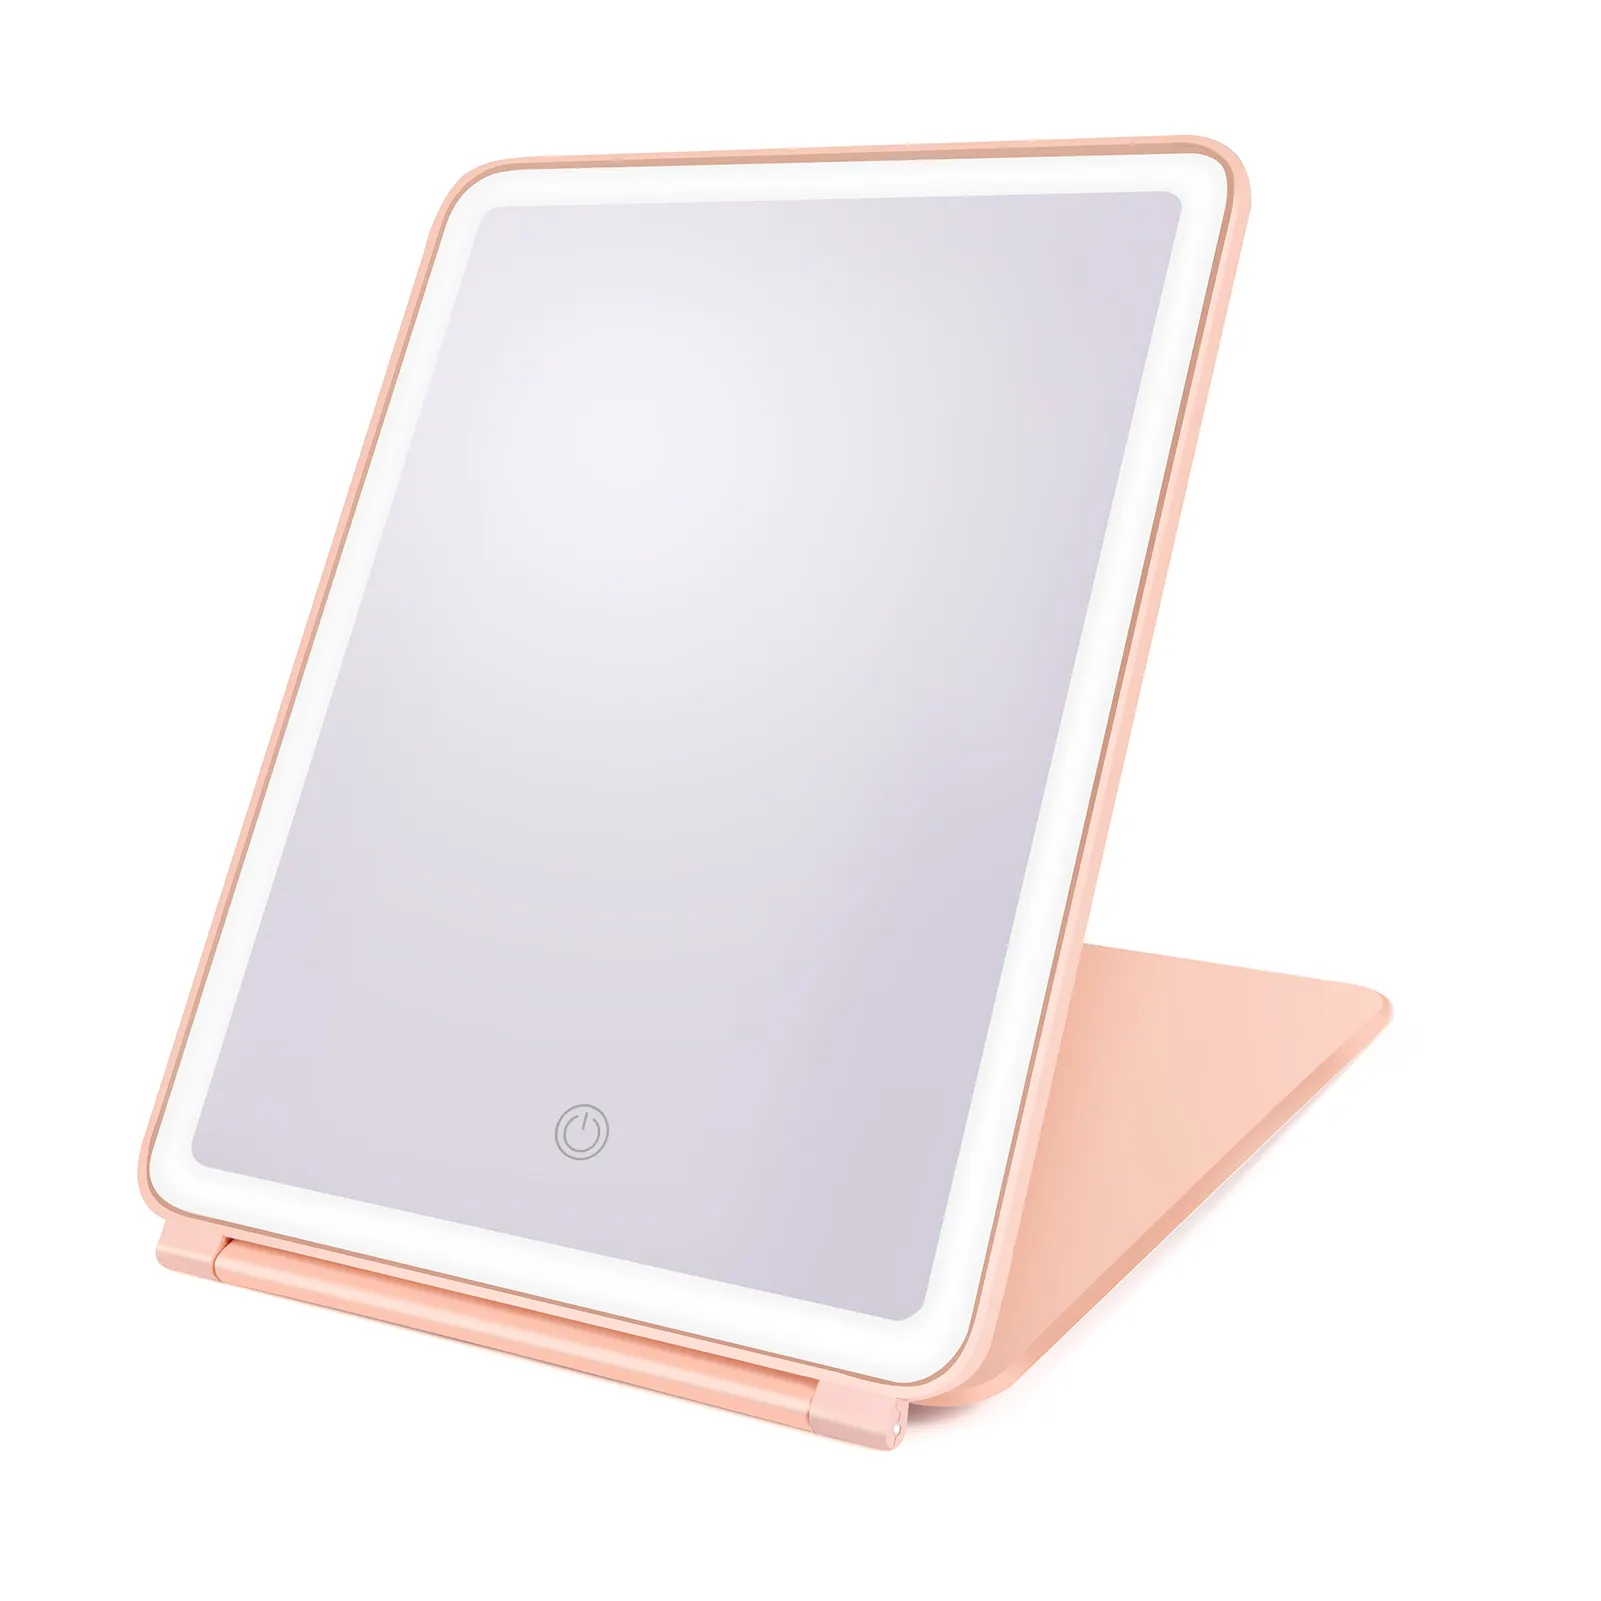 2021 New iPad Mini Makeup mirror with light 1200mah built in battery Portable travel make up mirror led